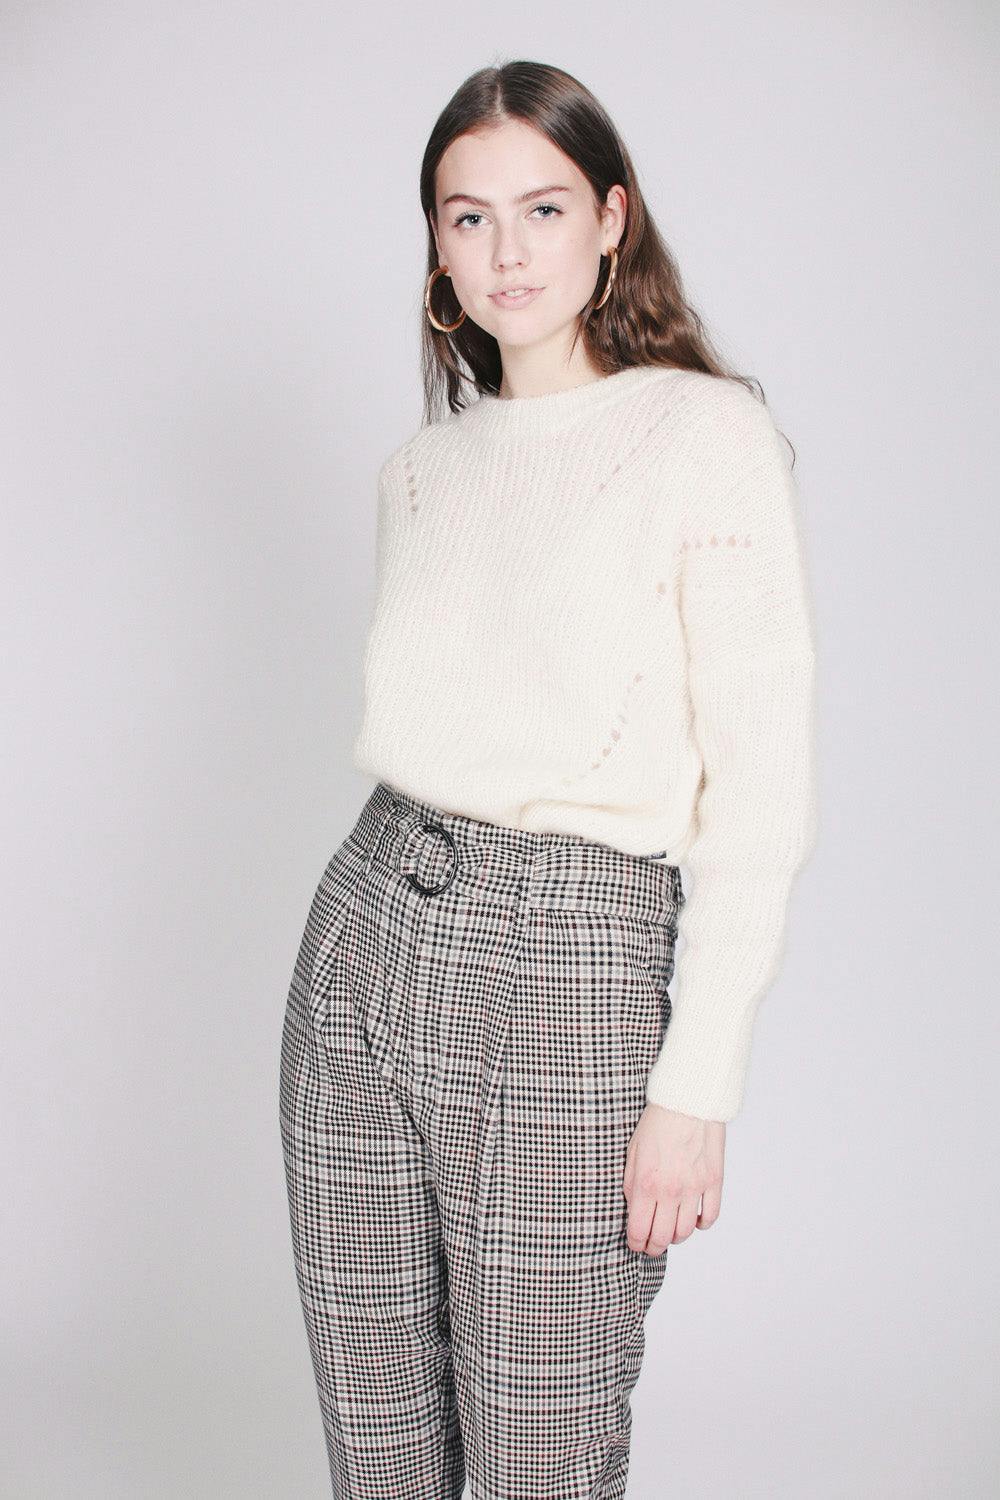 Ella & il Beatrice Chunky Knit - White XS - 2nd Hand Villoid - 2nd Hand Gensere - VILLOID.no